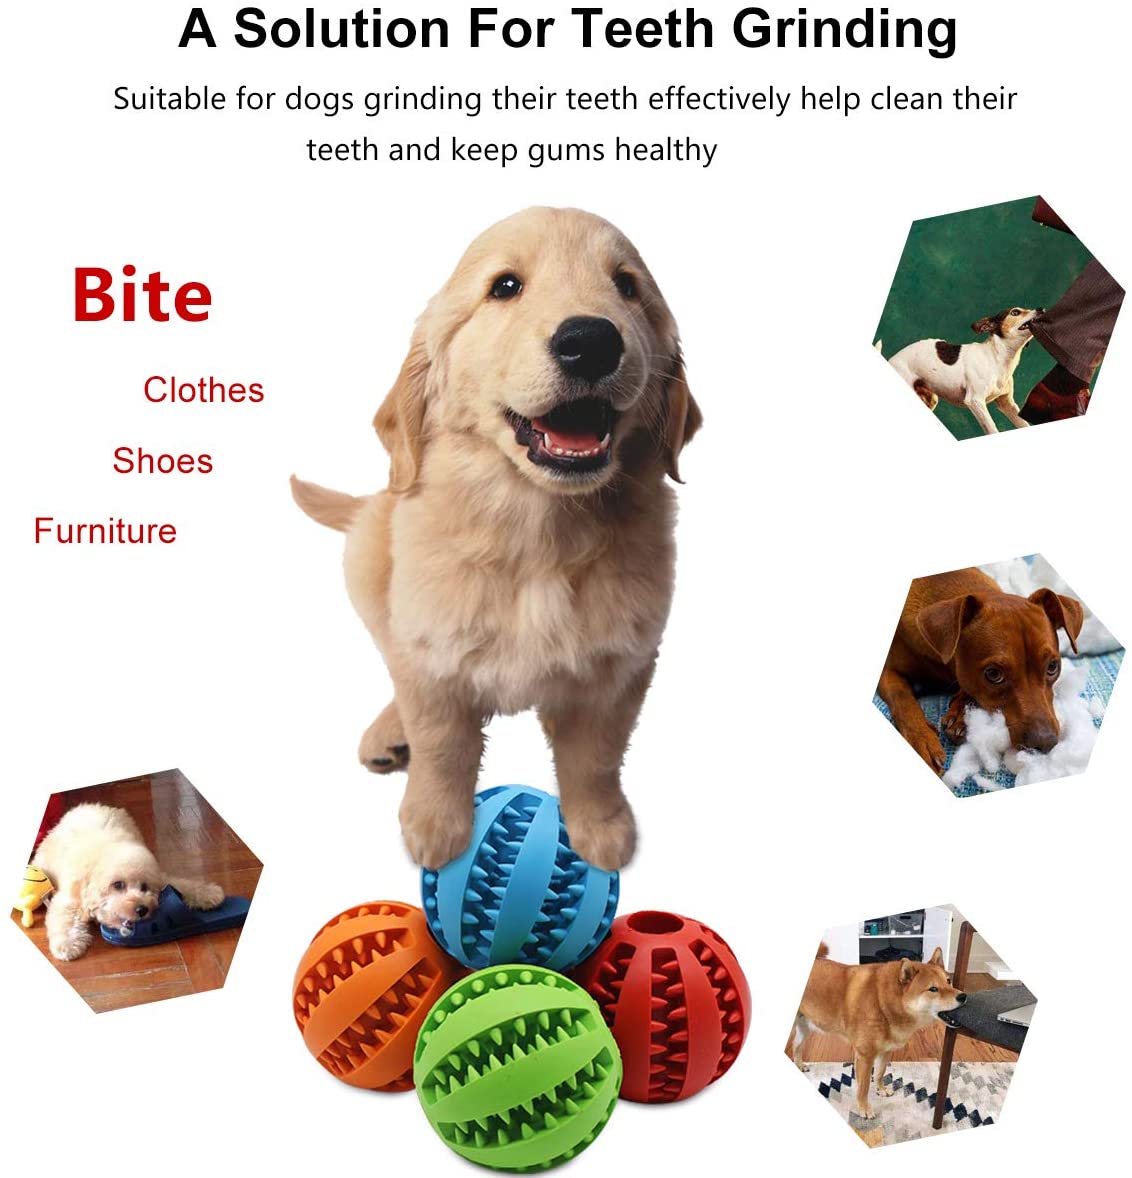 Dog Food Ball Teeth Grinding Toy for Dogs Dog Food Toys for Mental